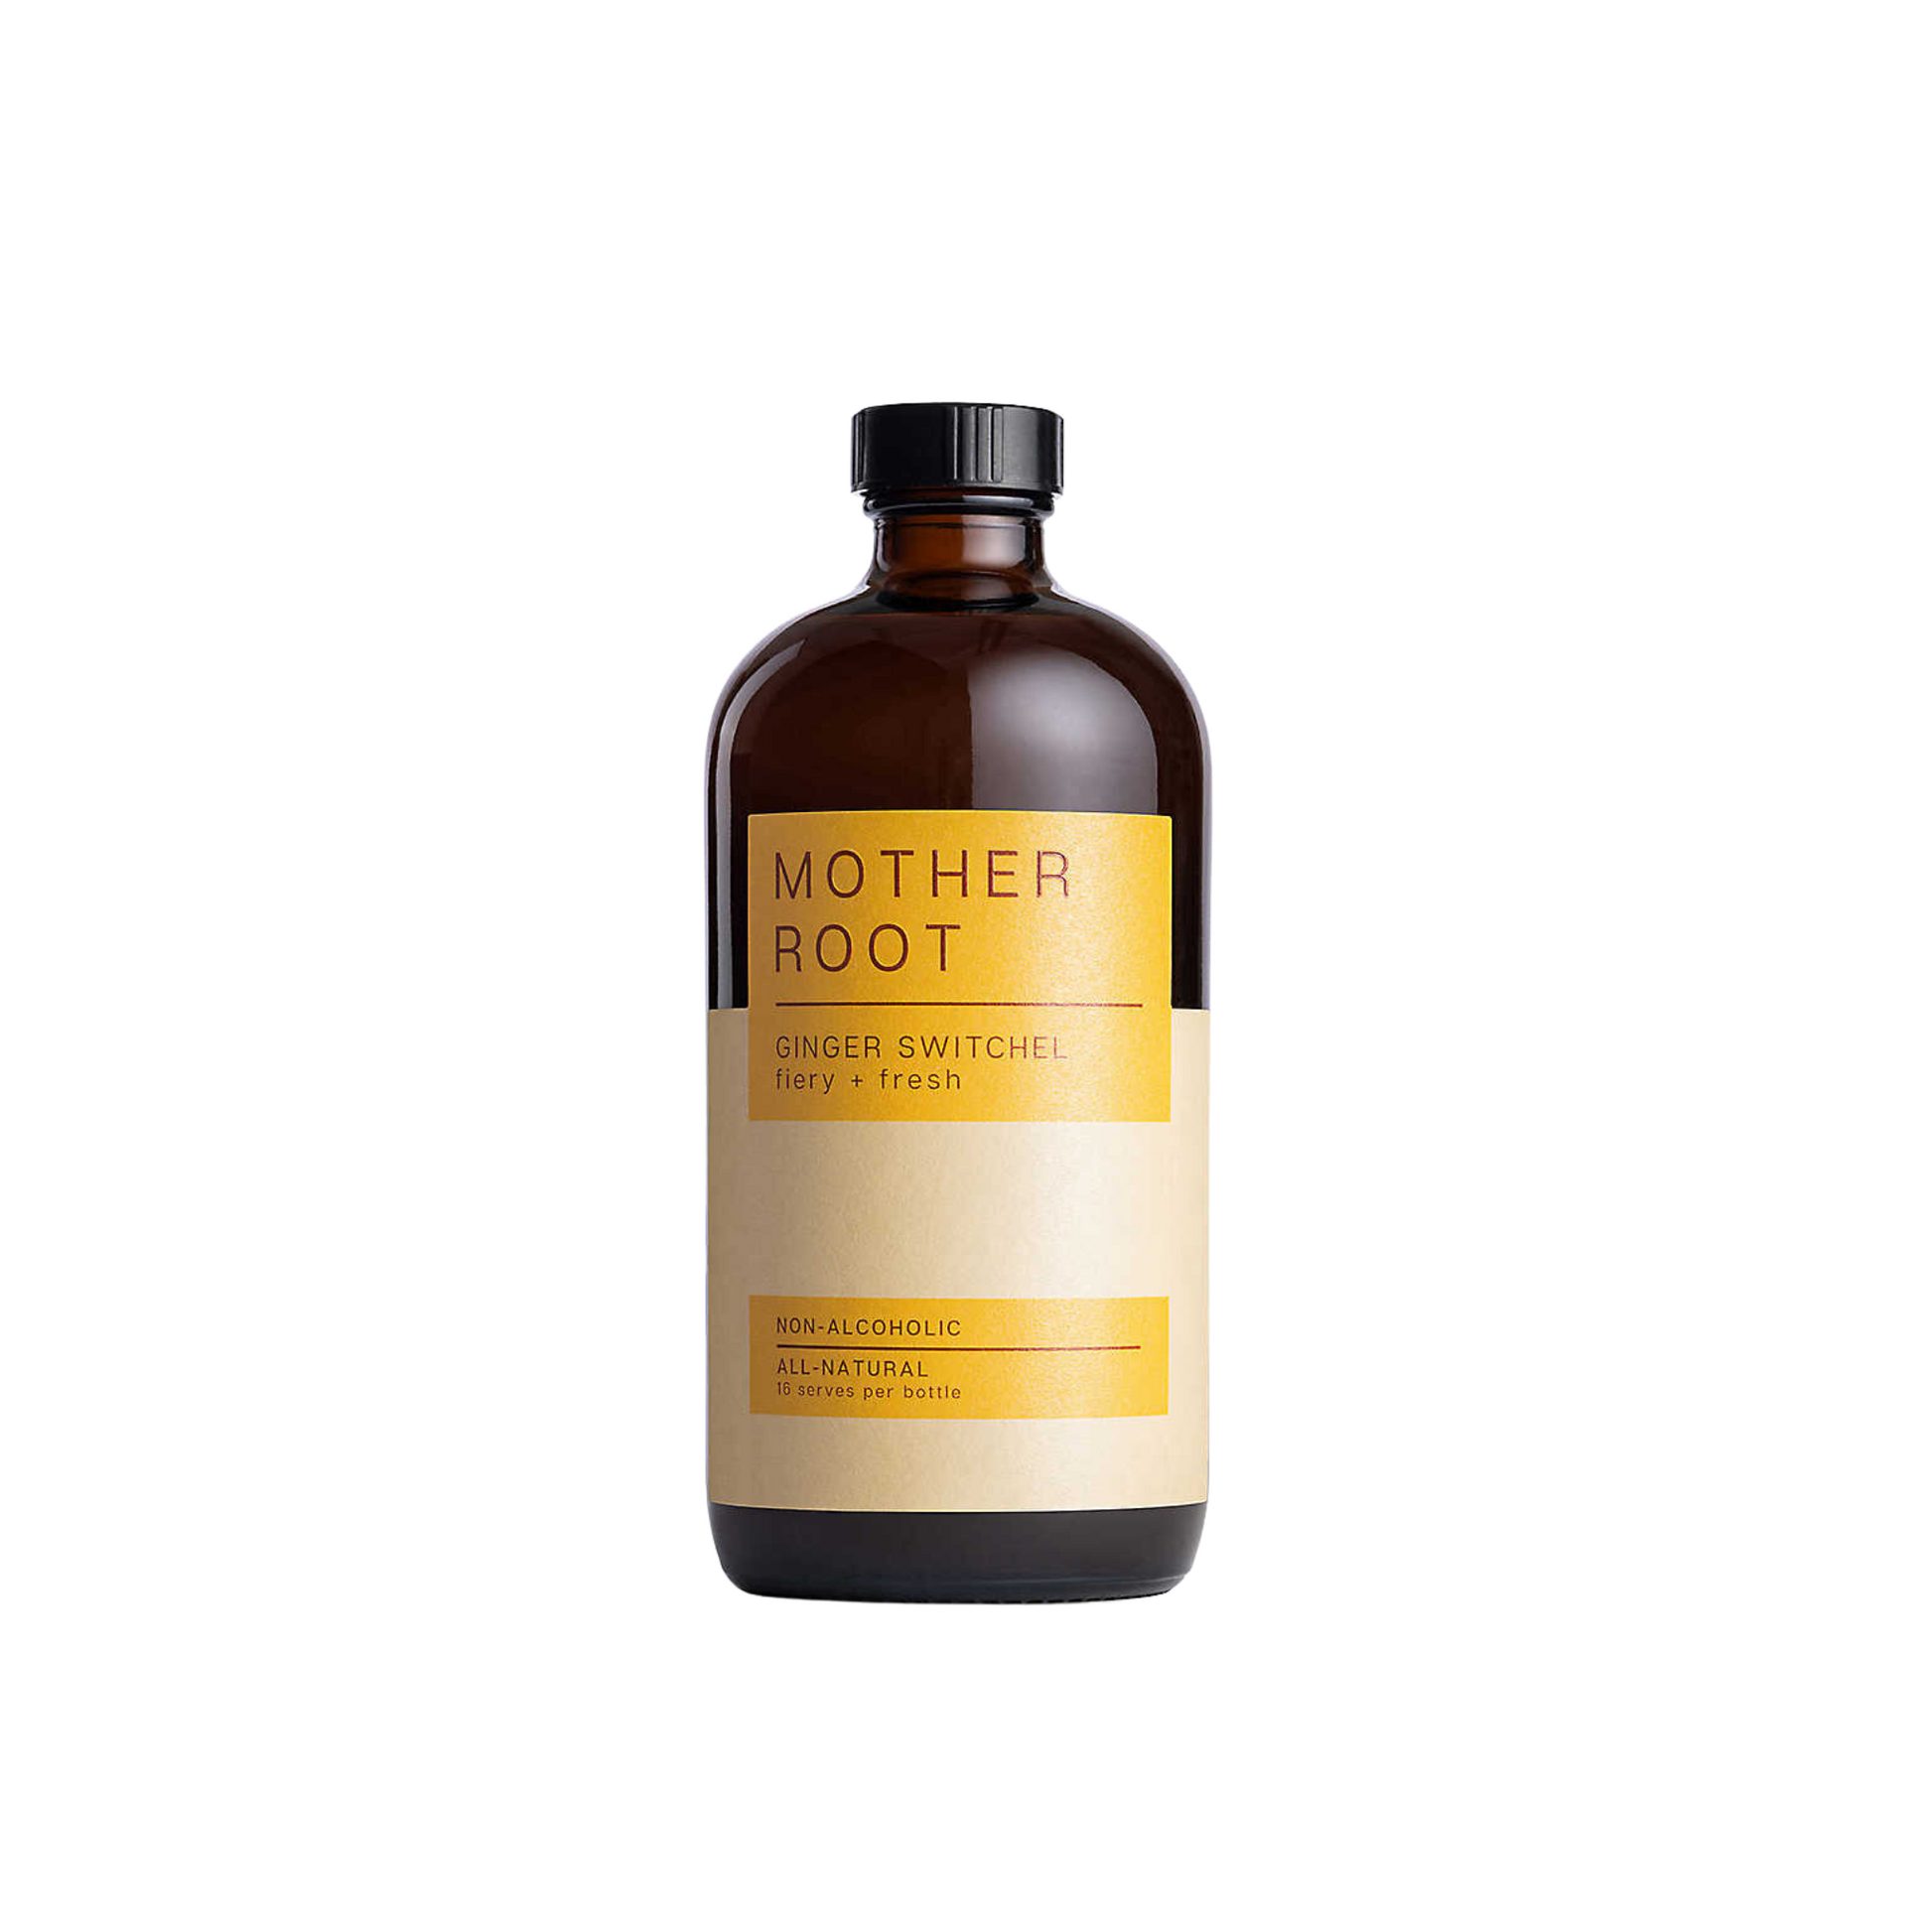 Mother Root Ginger Switchel Non-Alcoholic Aperitif